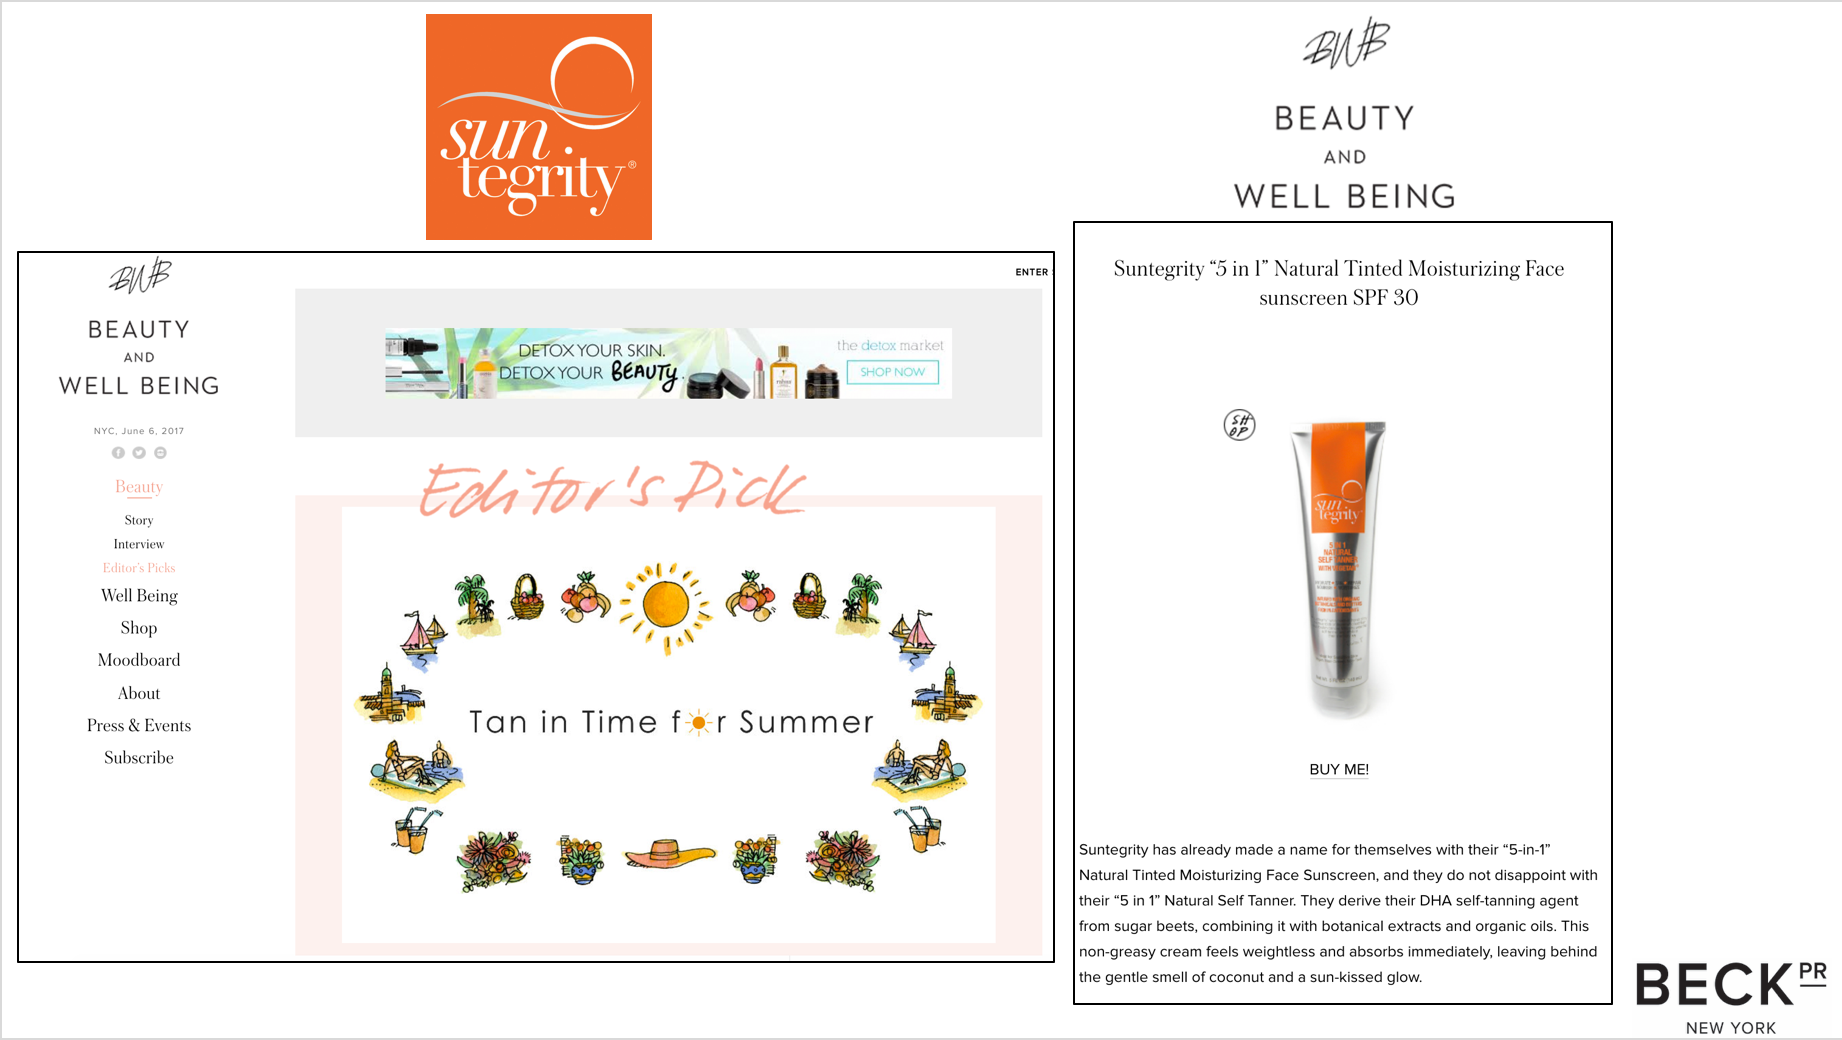 Bwb - Beauty And Well Being - Suntegrity Skincare